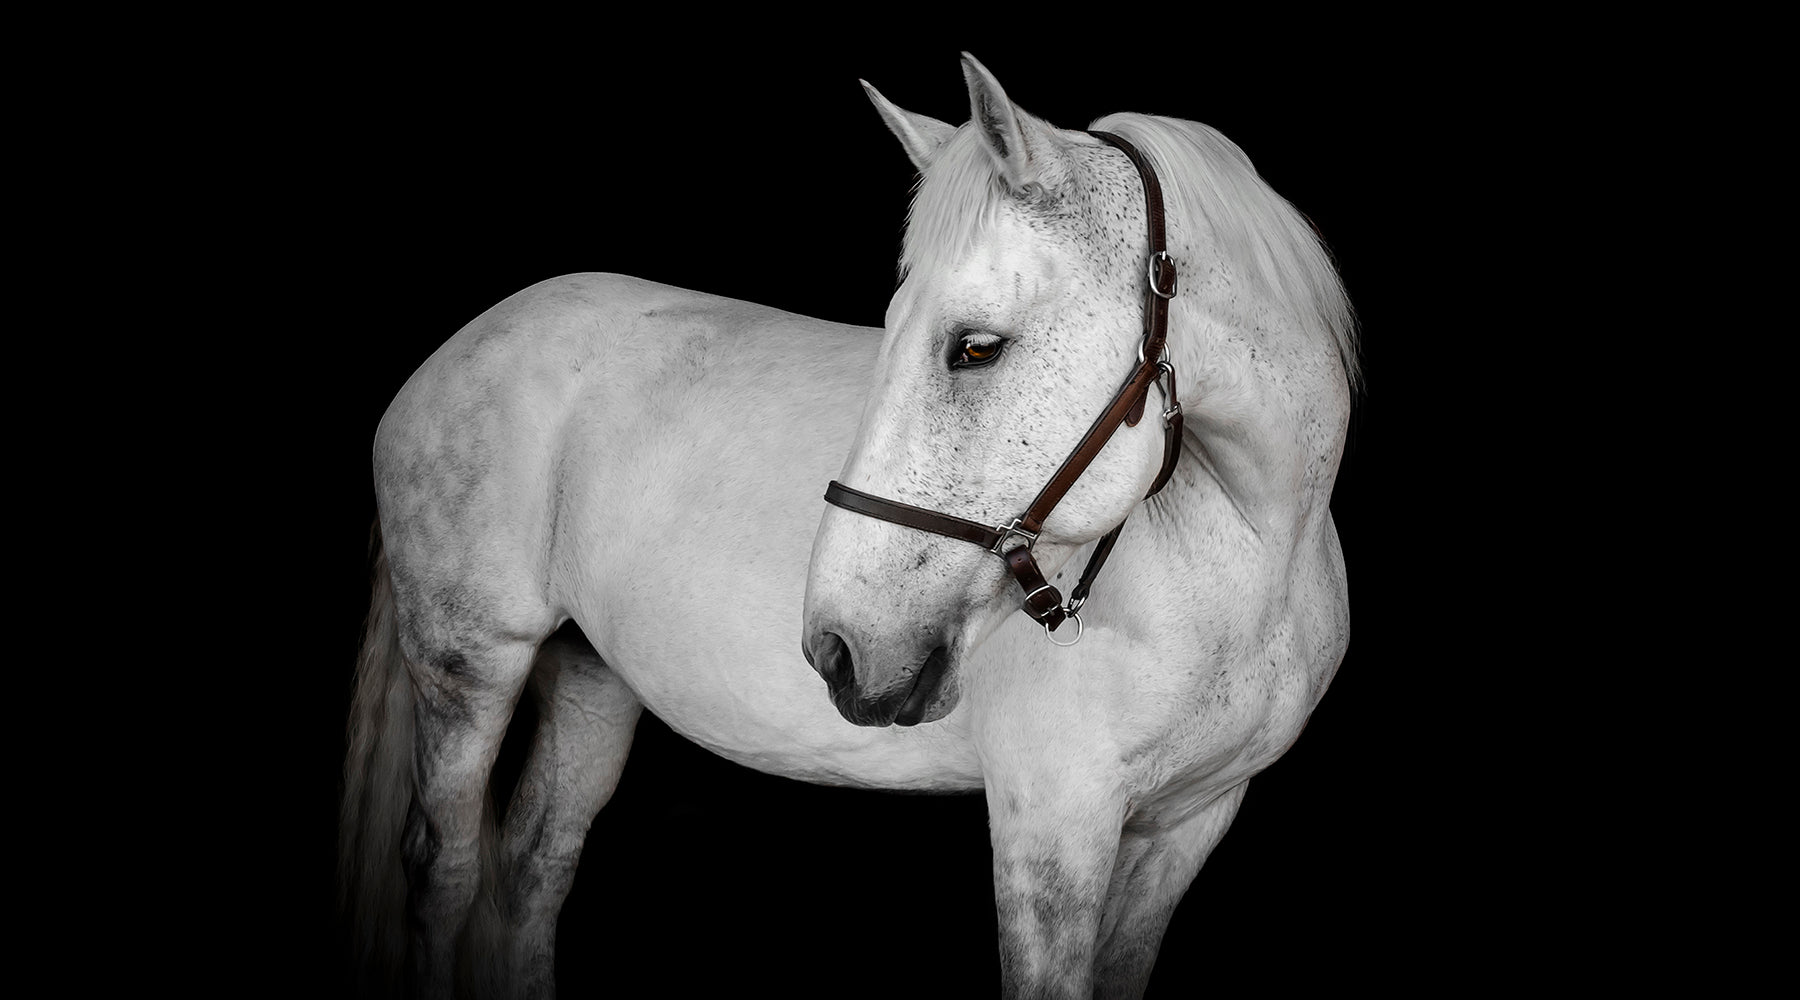 Horse Black Background Photography Session in Georgia and South Carolina. Horse White Background Portraits in Georgia and South Carolina